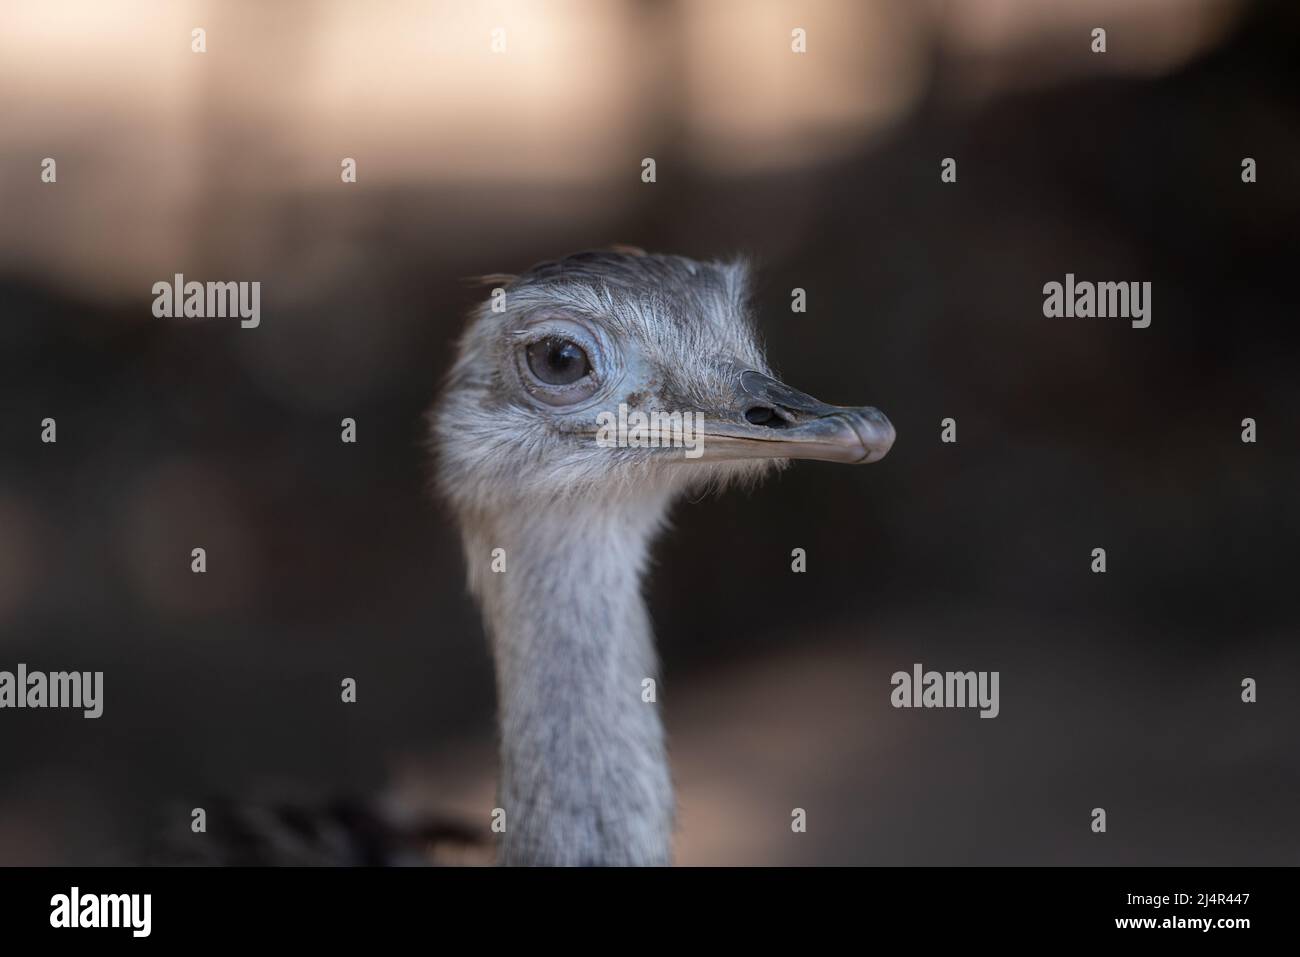 The 'Ñandú' common rhea or pampas choique (Rhea americana) is a species of bird of the Rheidae family. It is found exclusively in South America. Altho Stock Photo